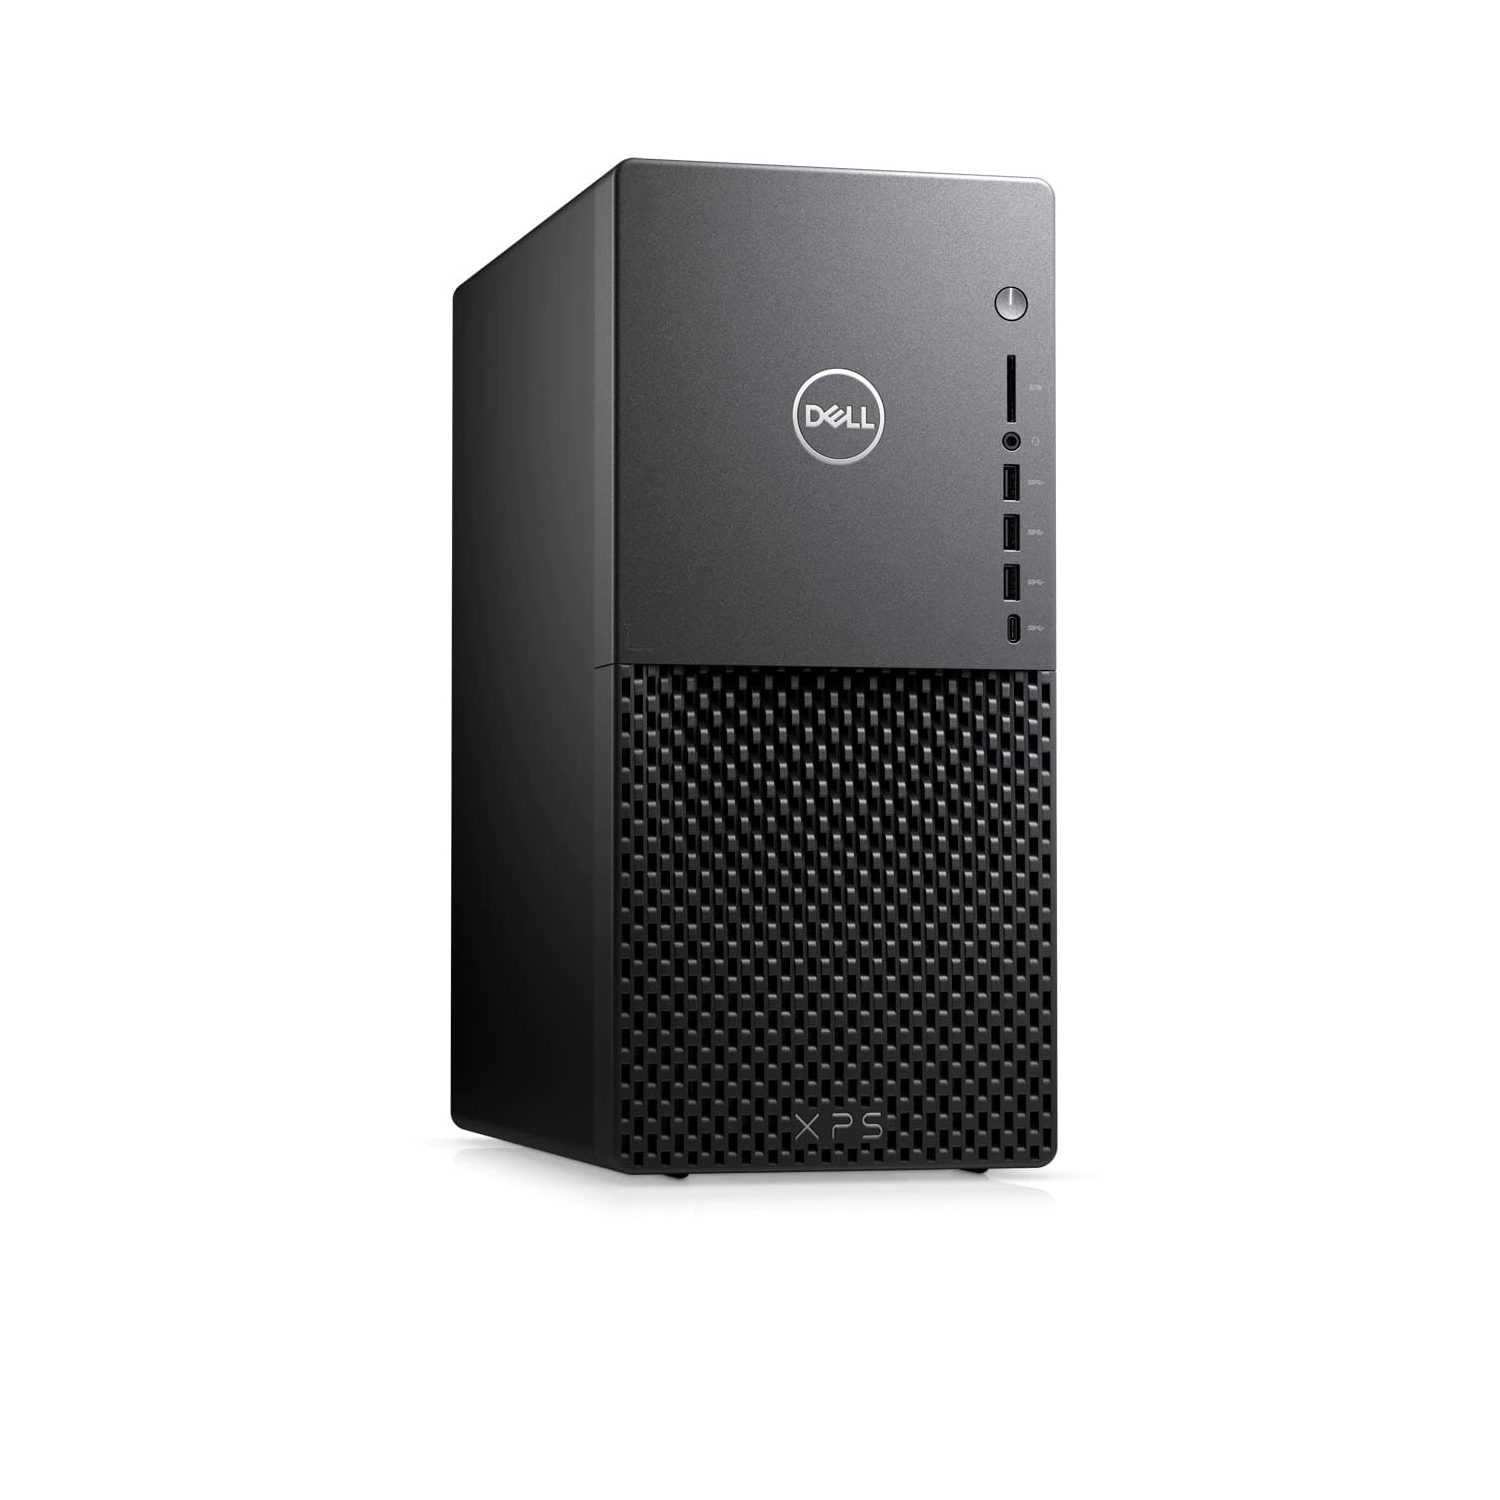 Refurbished (Excellent) - Dell XPS 8940 Desktop (2020) | Core i7 - 2TB HDD + 1TB SSD - 64GB RAM - RTX 3070 | 8 Cores @ 4.9 GHz - 11th Gen CPU Certified Refurbished